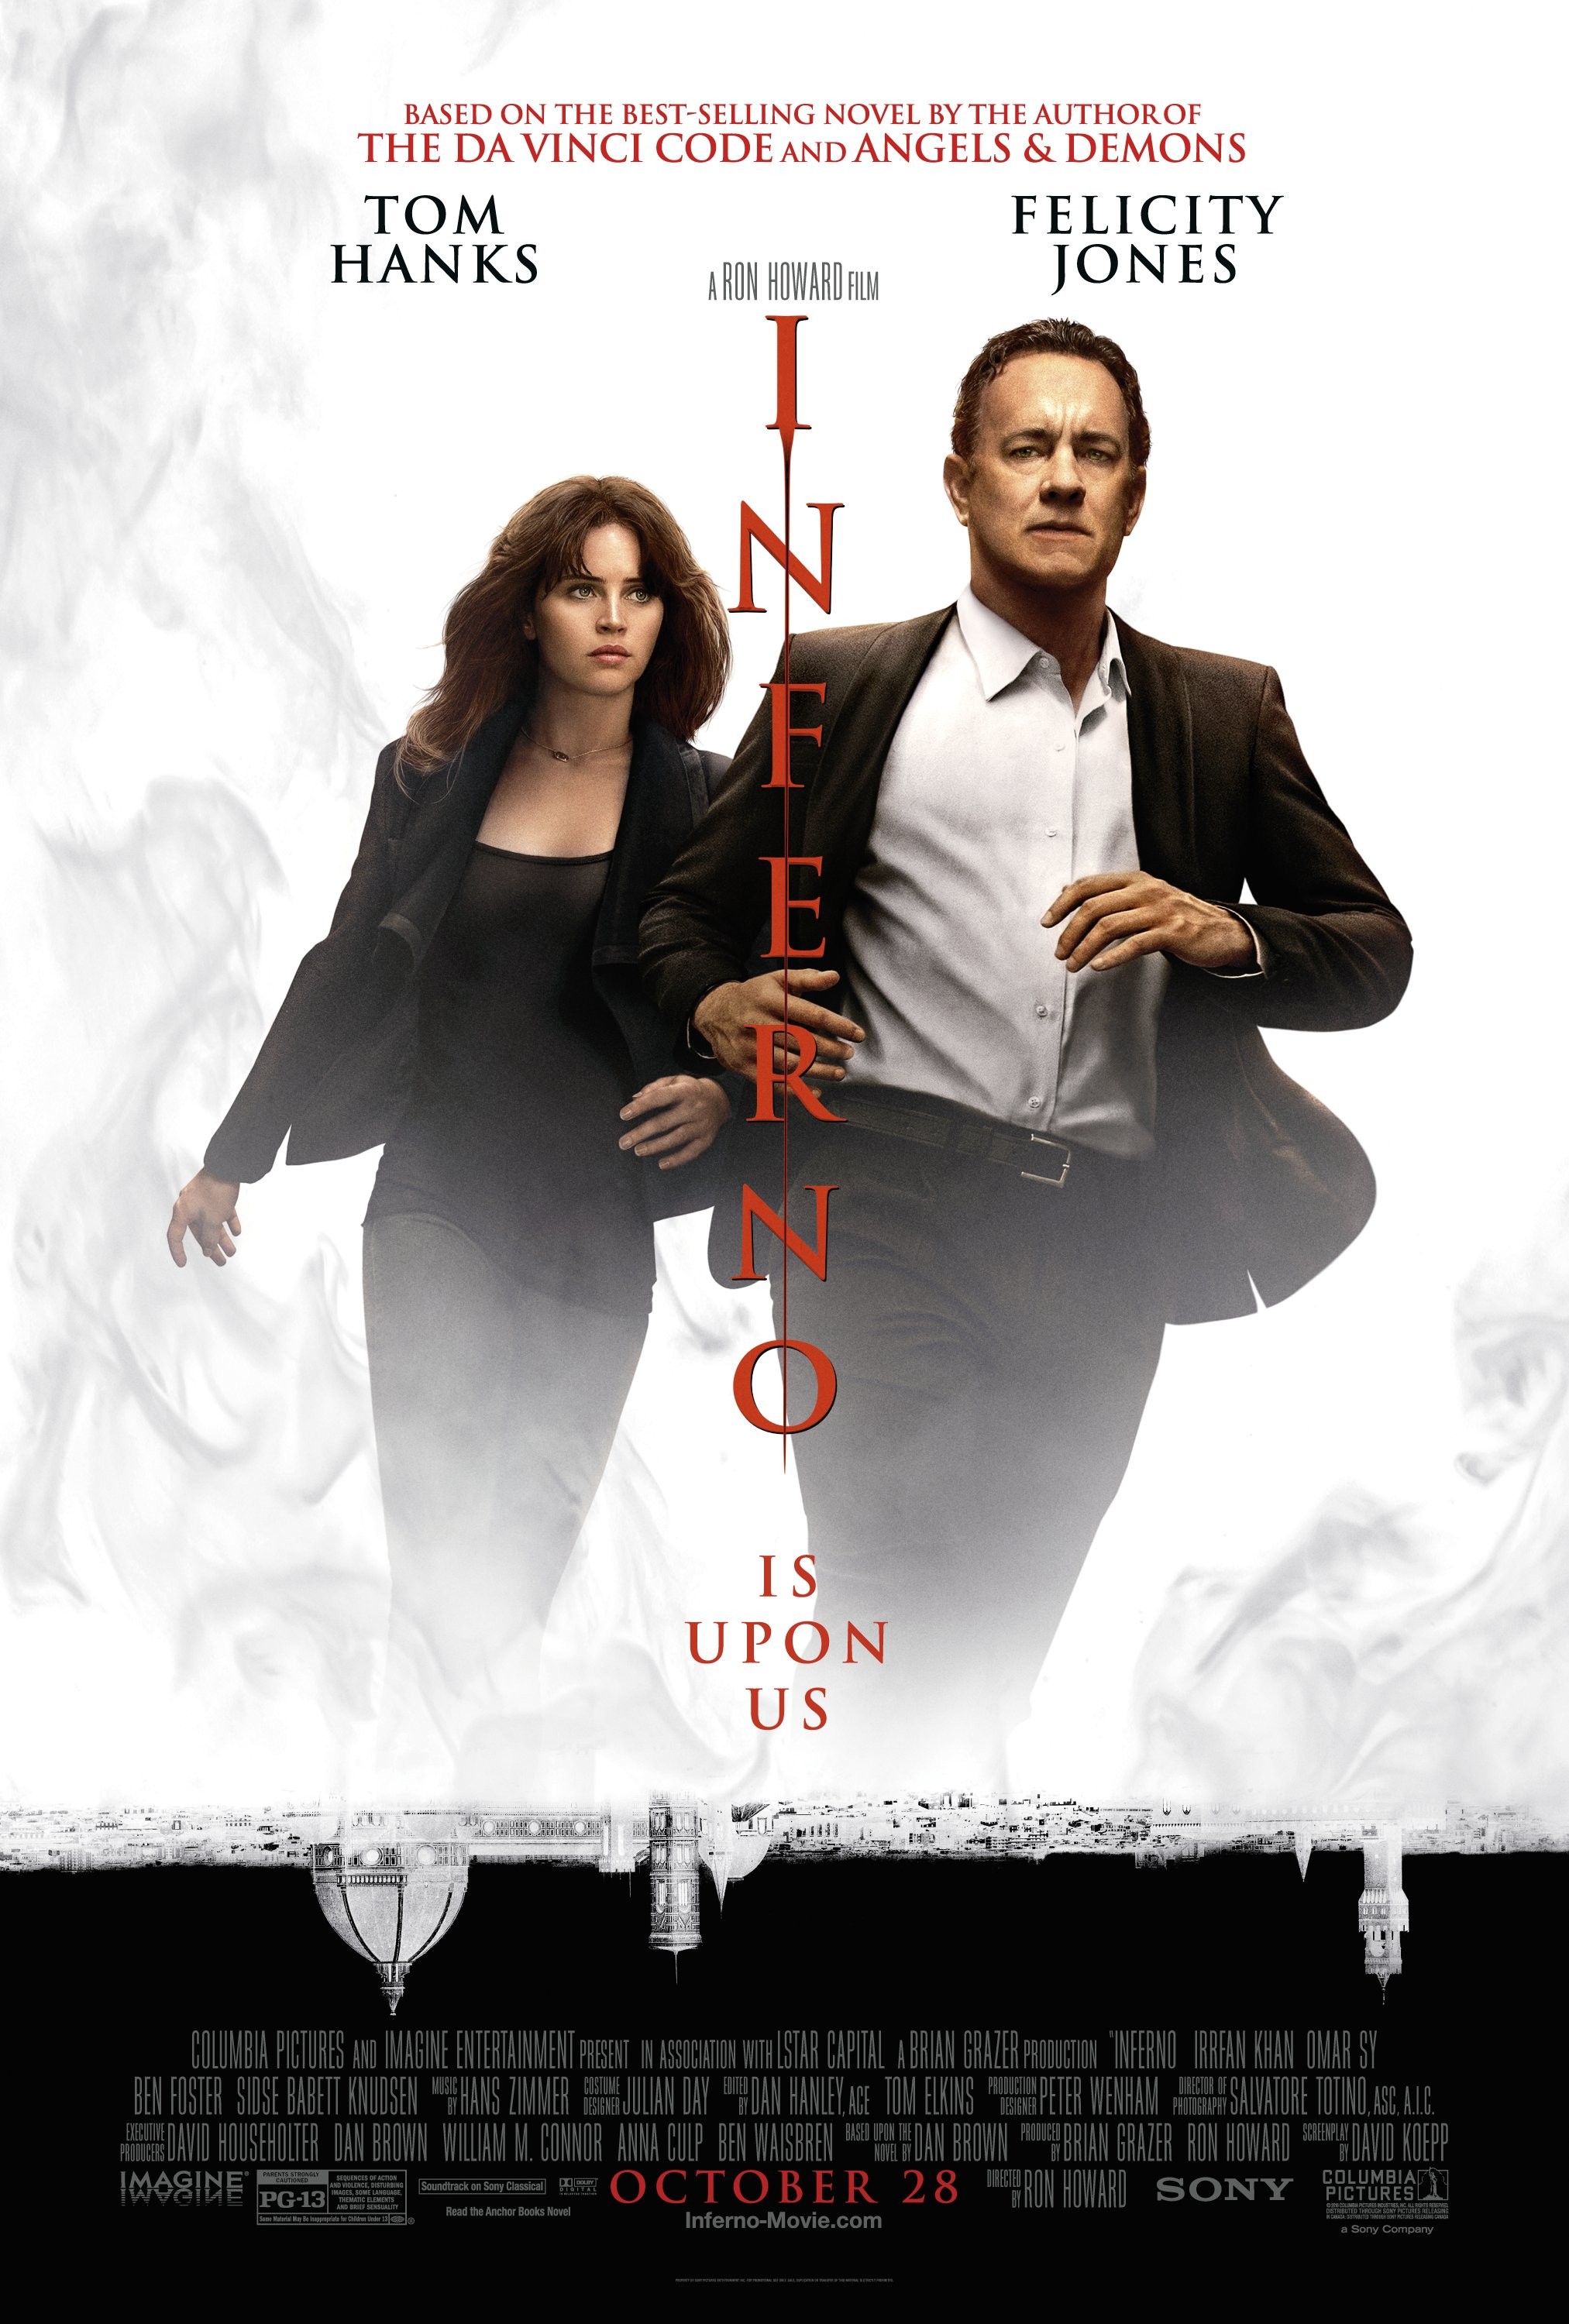 chad windham recommends Inferno Movie Online Free